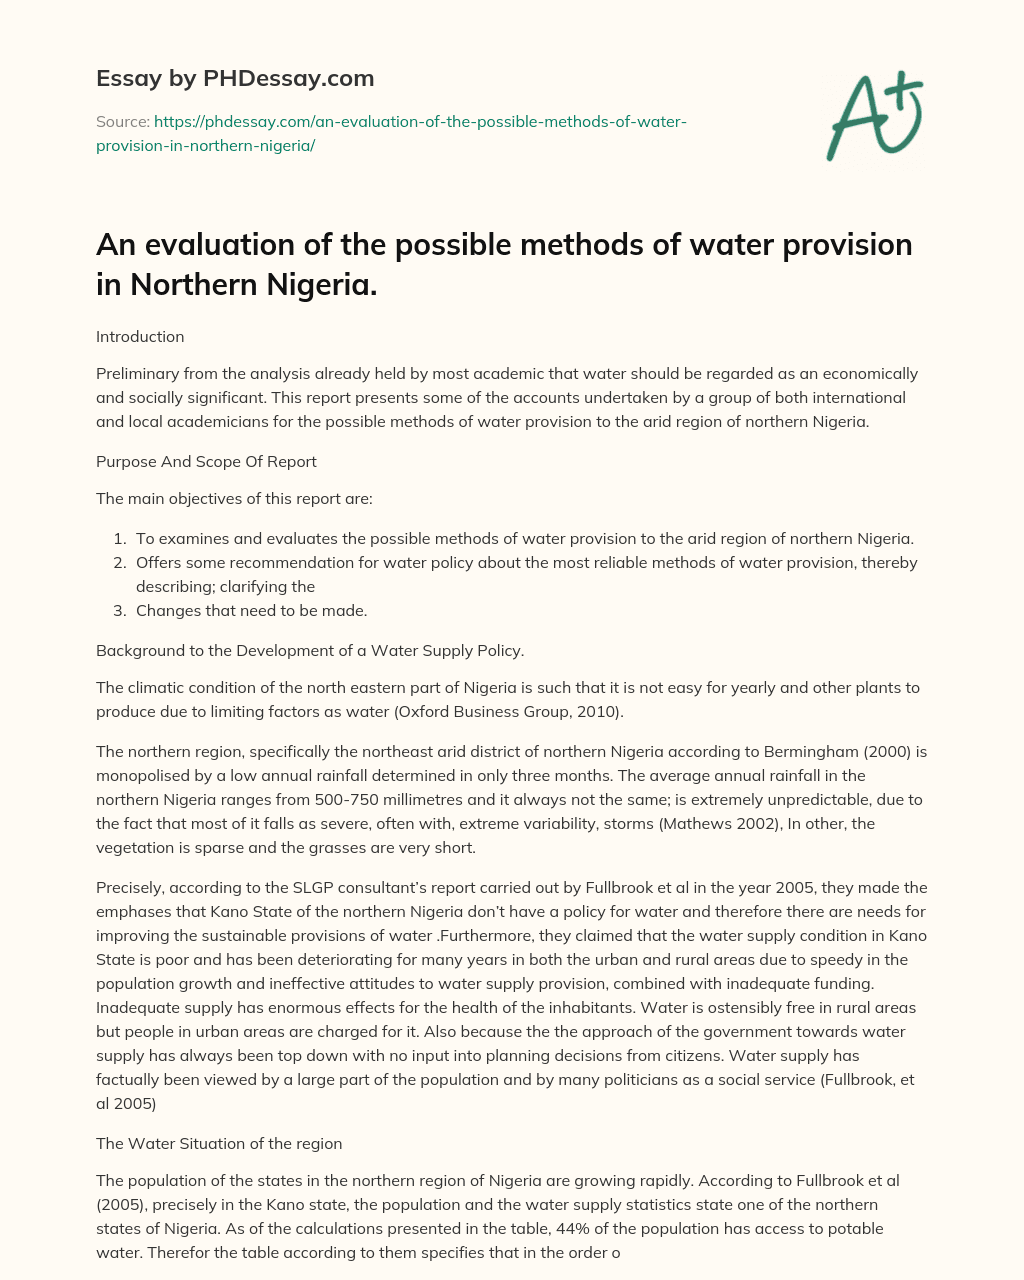 An evaluation of the possible methods of water provision in Northern Nigeria. essay